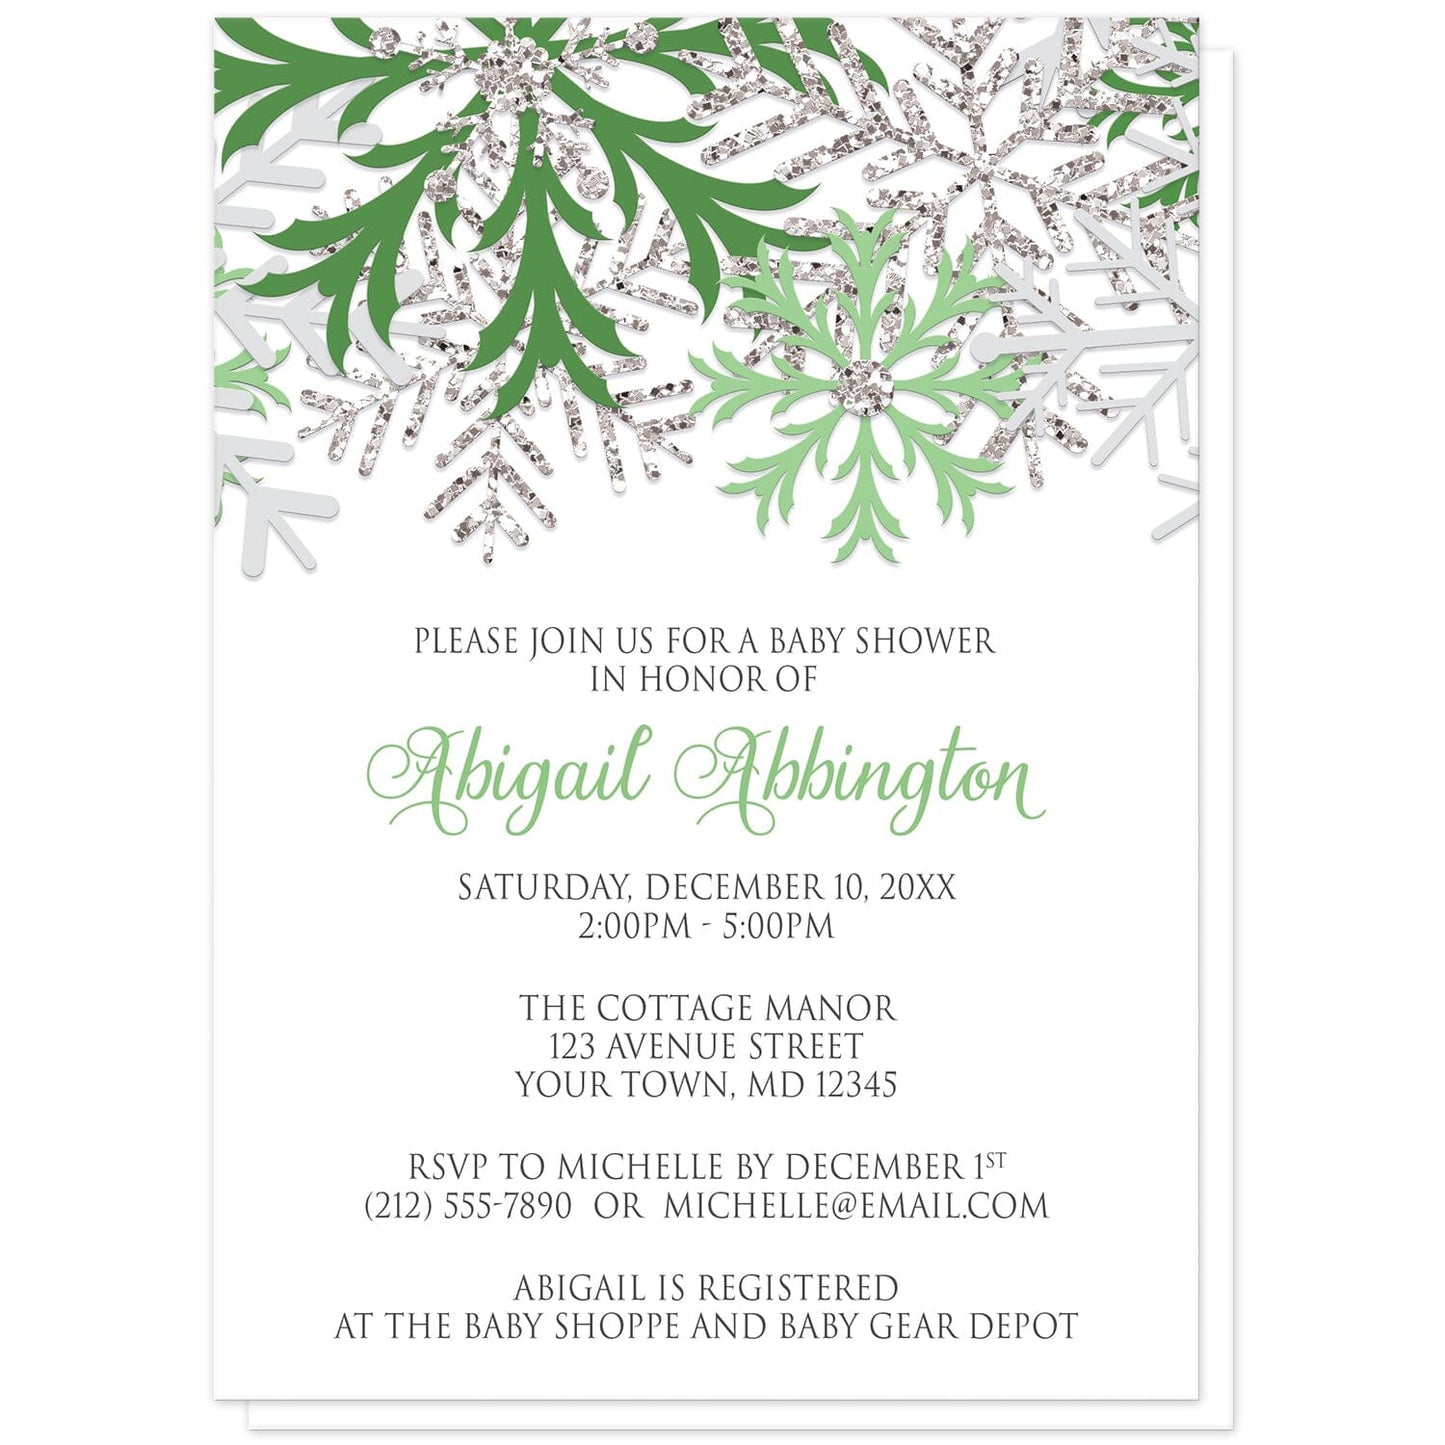 Winter Green Silver Snowflake Baby Shower Invitations at Artistically Invited. Beautiful winter green silver snowflake baby shower invitations designed with green, light green, silver-colored glitter-illustrated, and light gray snowflakes along the top over a white background. Your personalized baby shower celebration details are custom printed in green and gray below the pretty snowflakes.